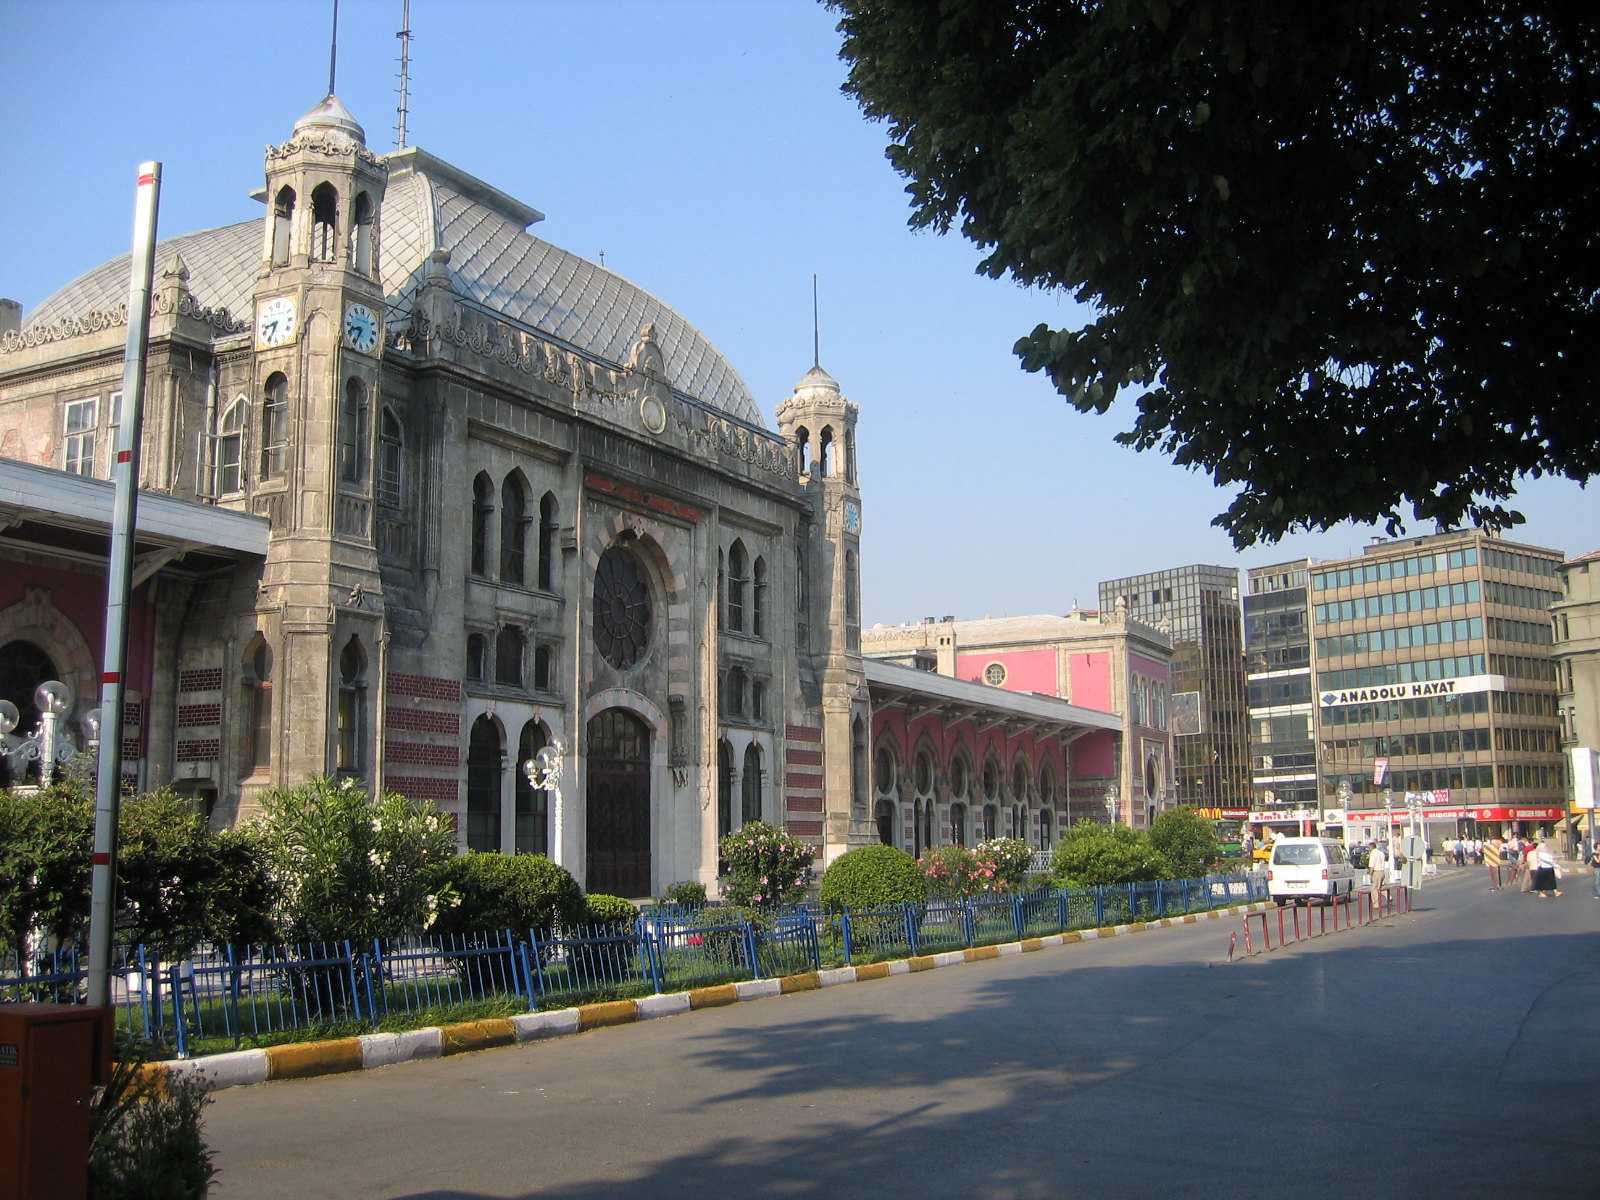 the Sirkecki Train Station in Istanbul